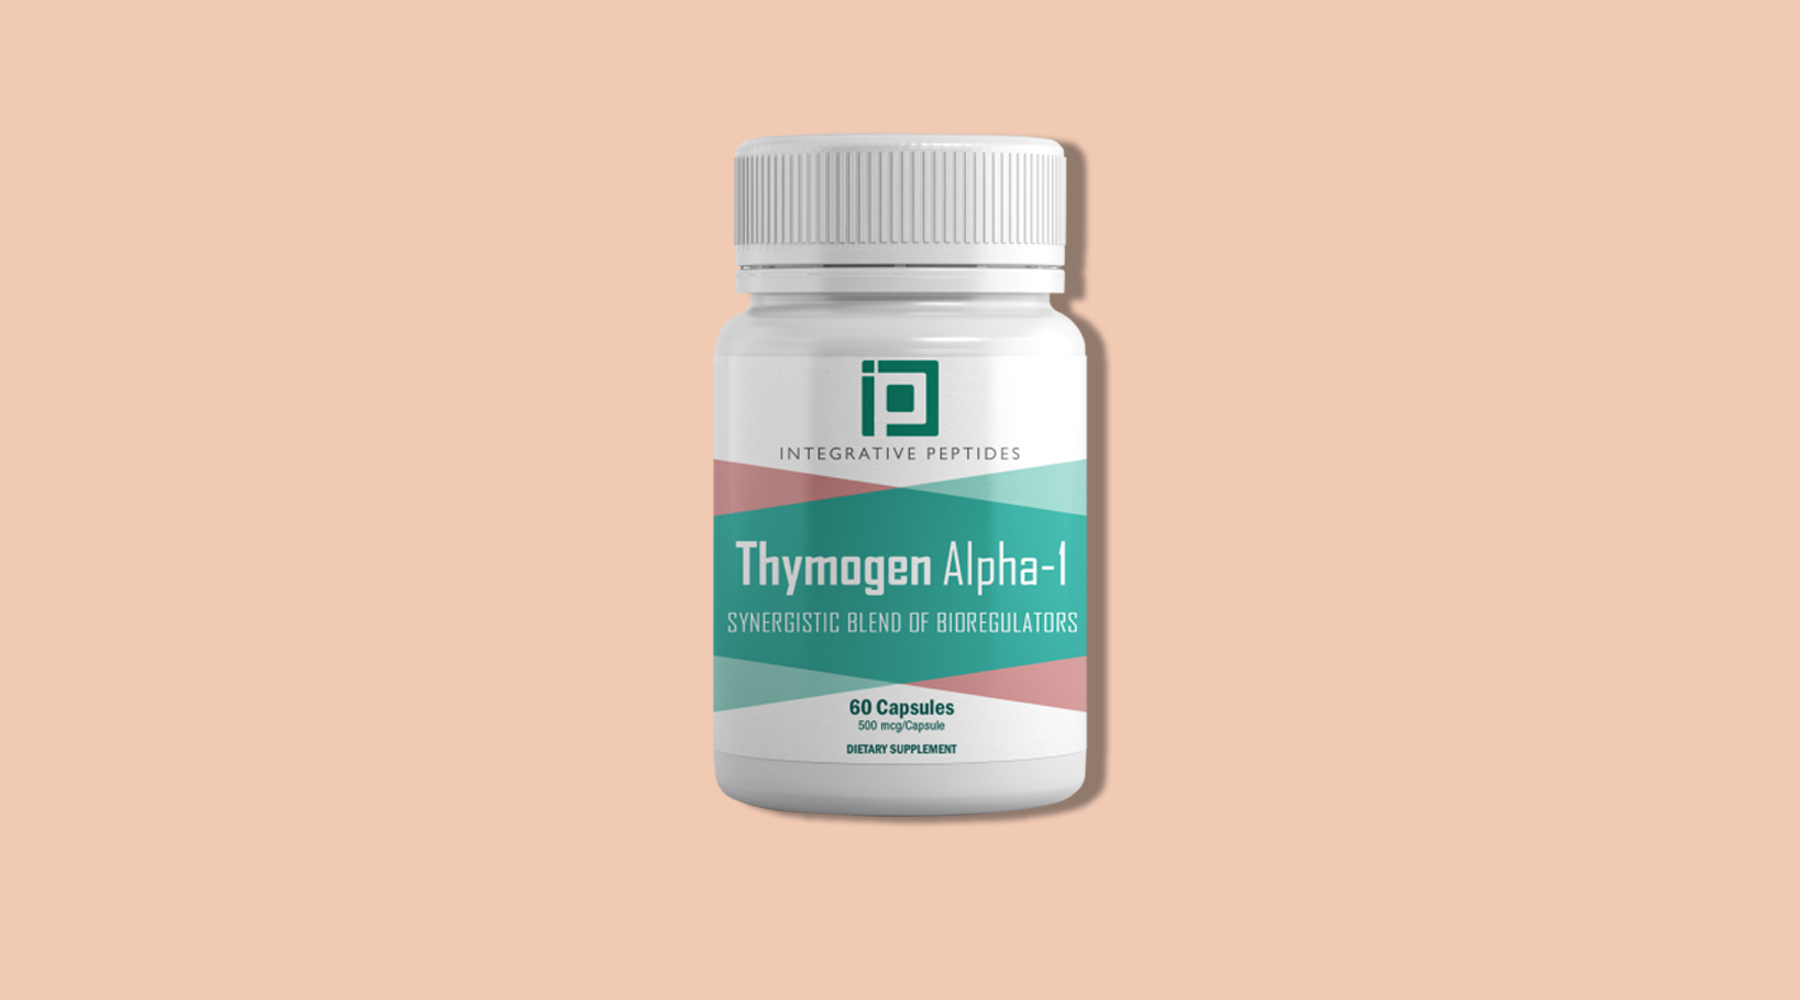 Introducing Thymogen Alpha-1 by Integrative Peptides